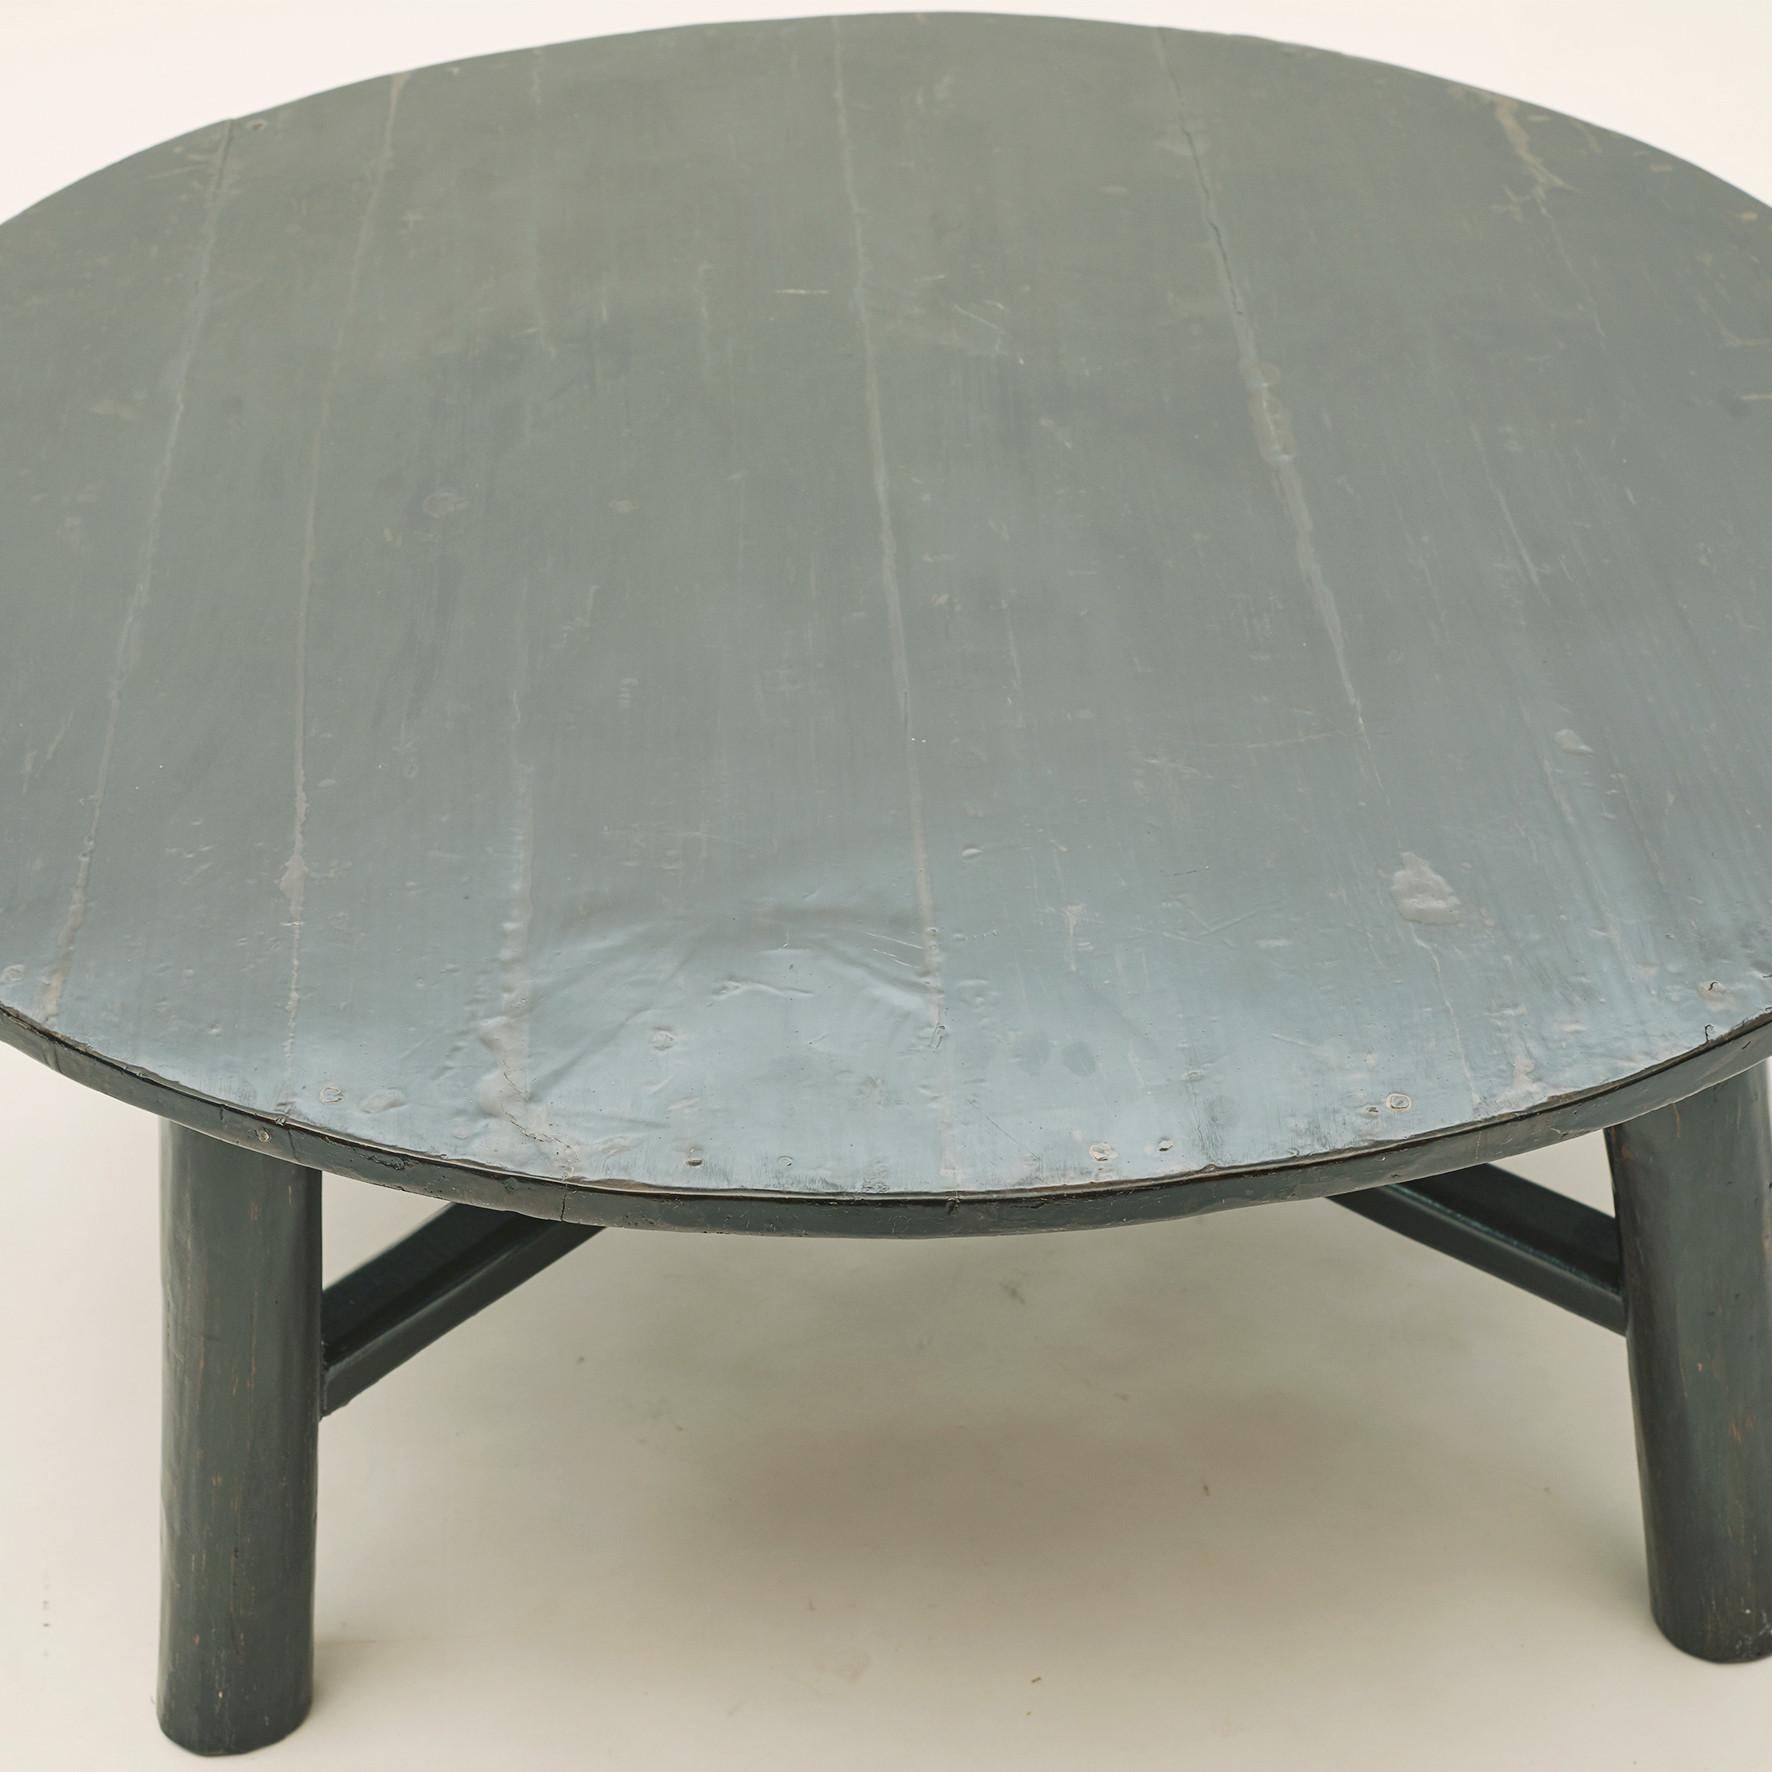 Coffee table. Original black lacquer, patinated.
Round tabletop, four legs united by a cross stretcher.
Shanxi Province, China, circa 1840.